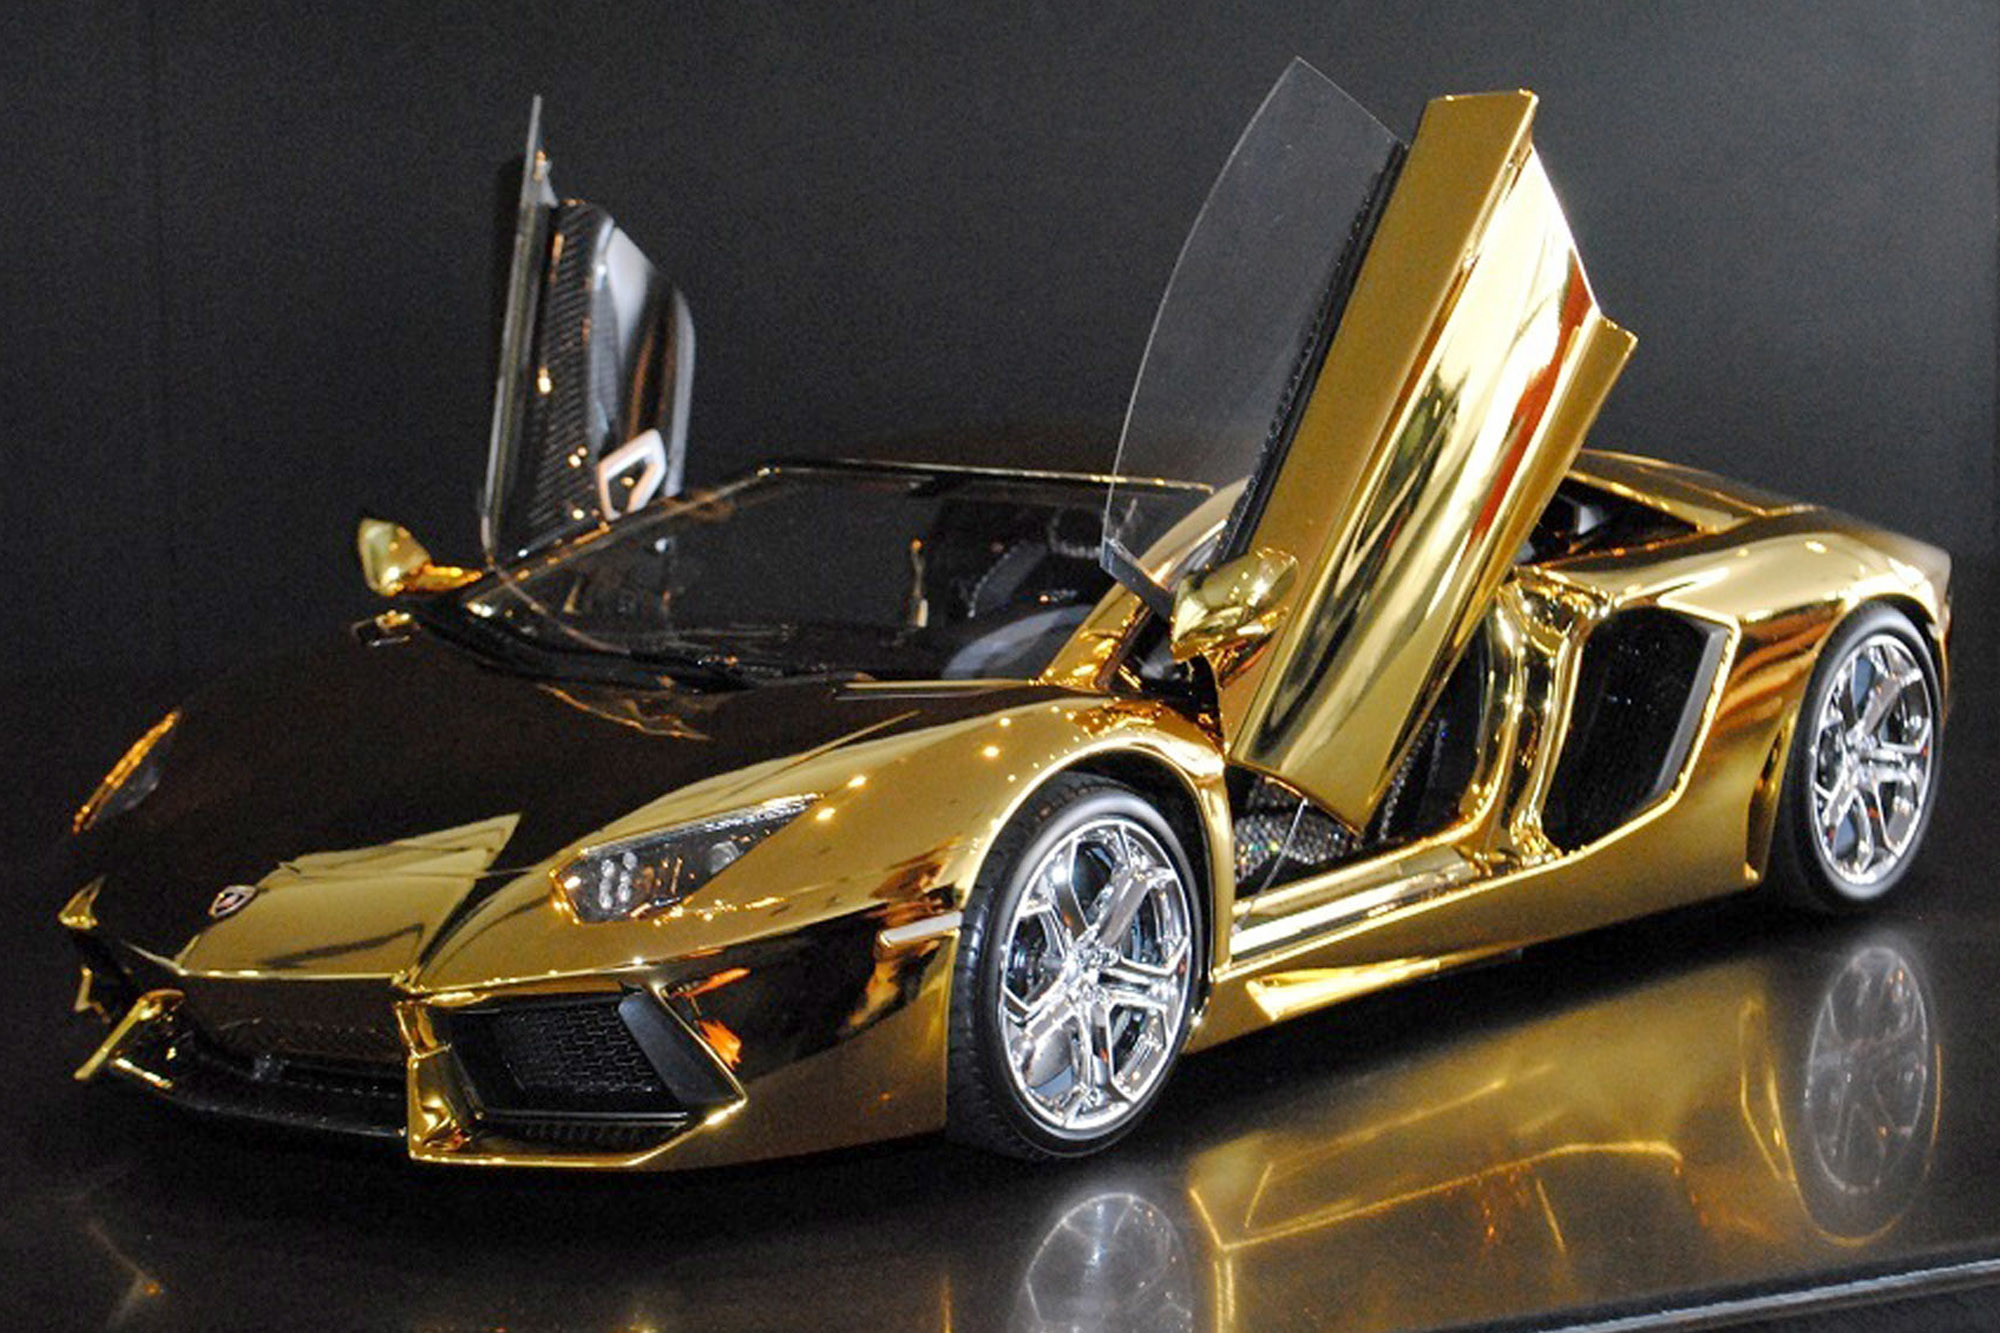 2000x1333 solid gold Lamborghini and 6 other supercars | New York Post